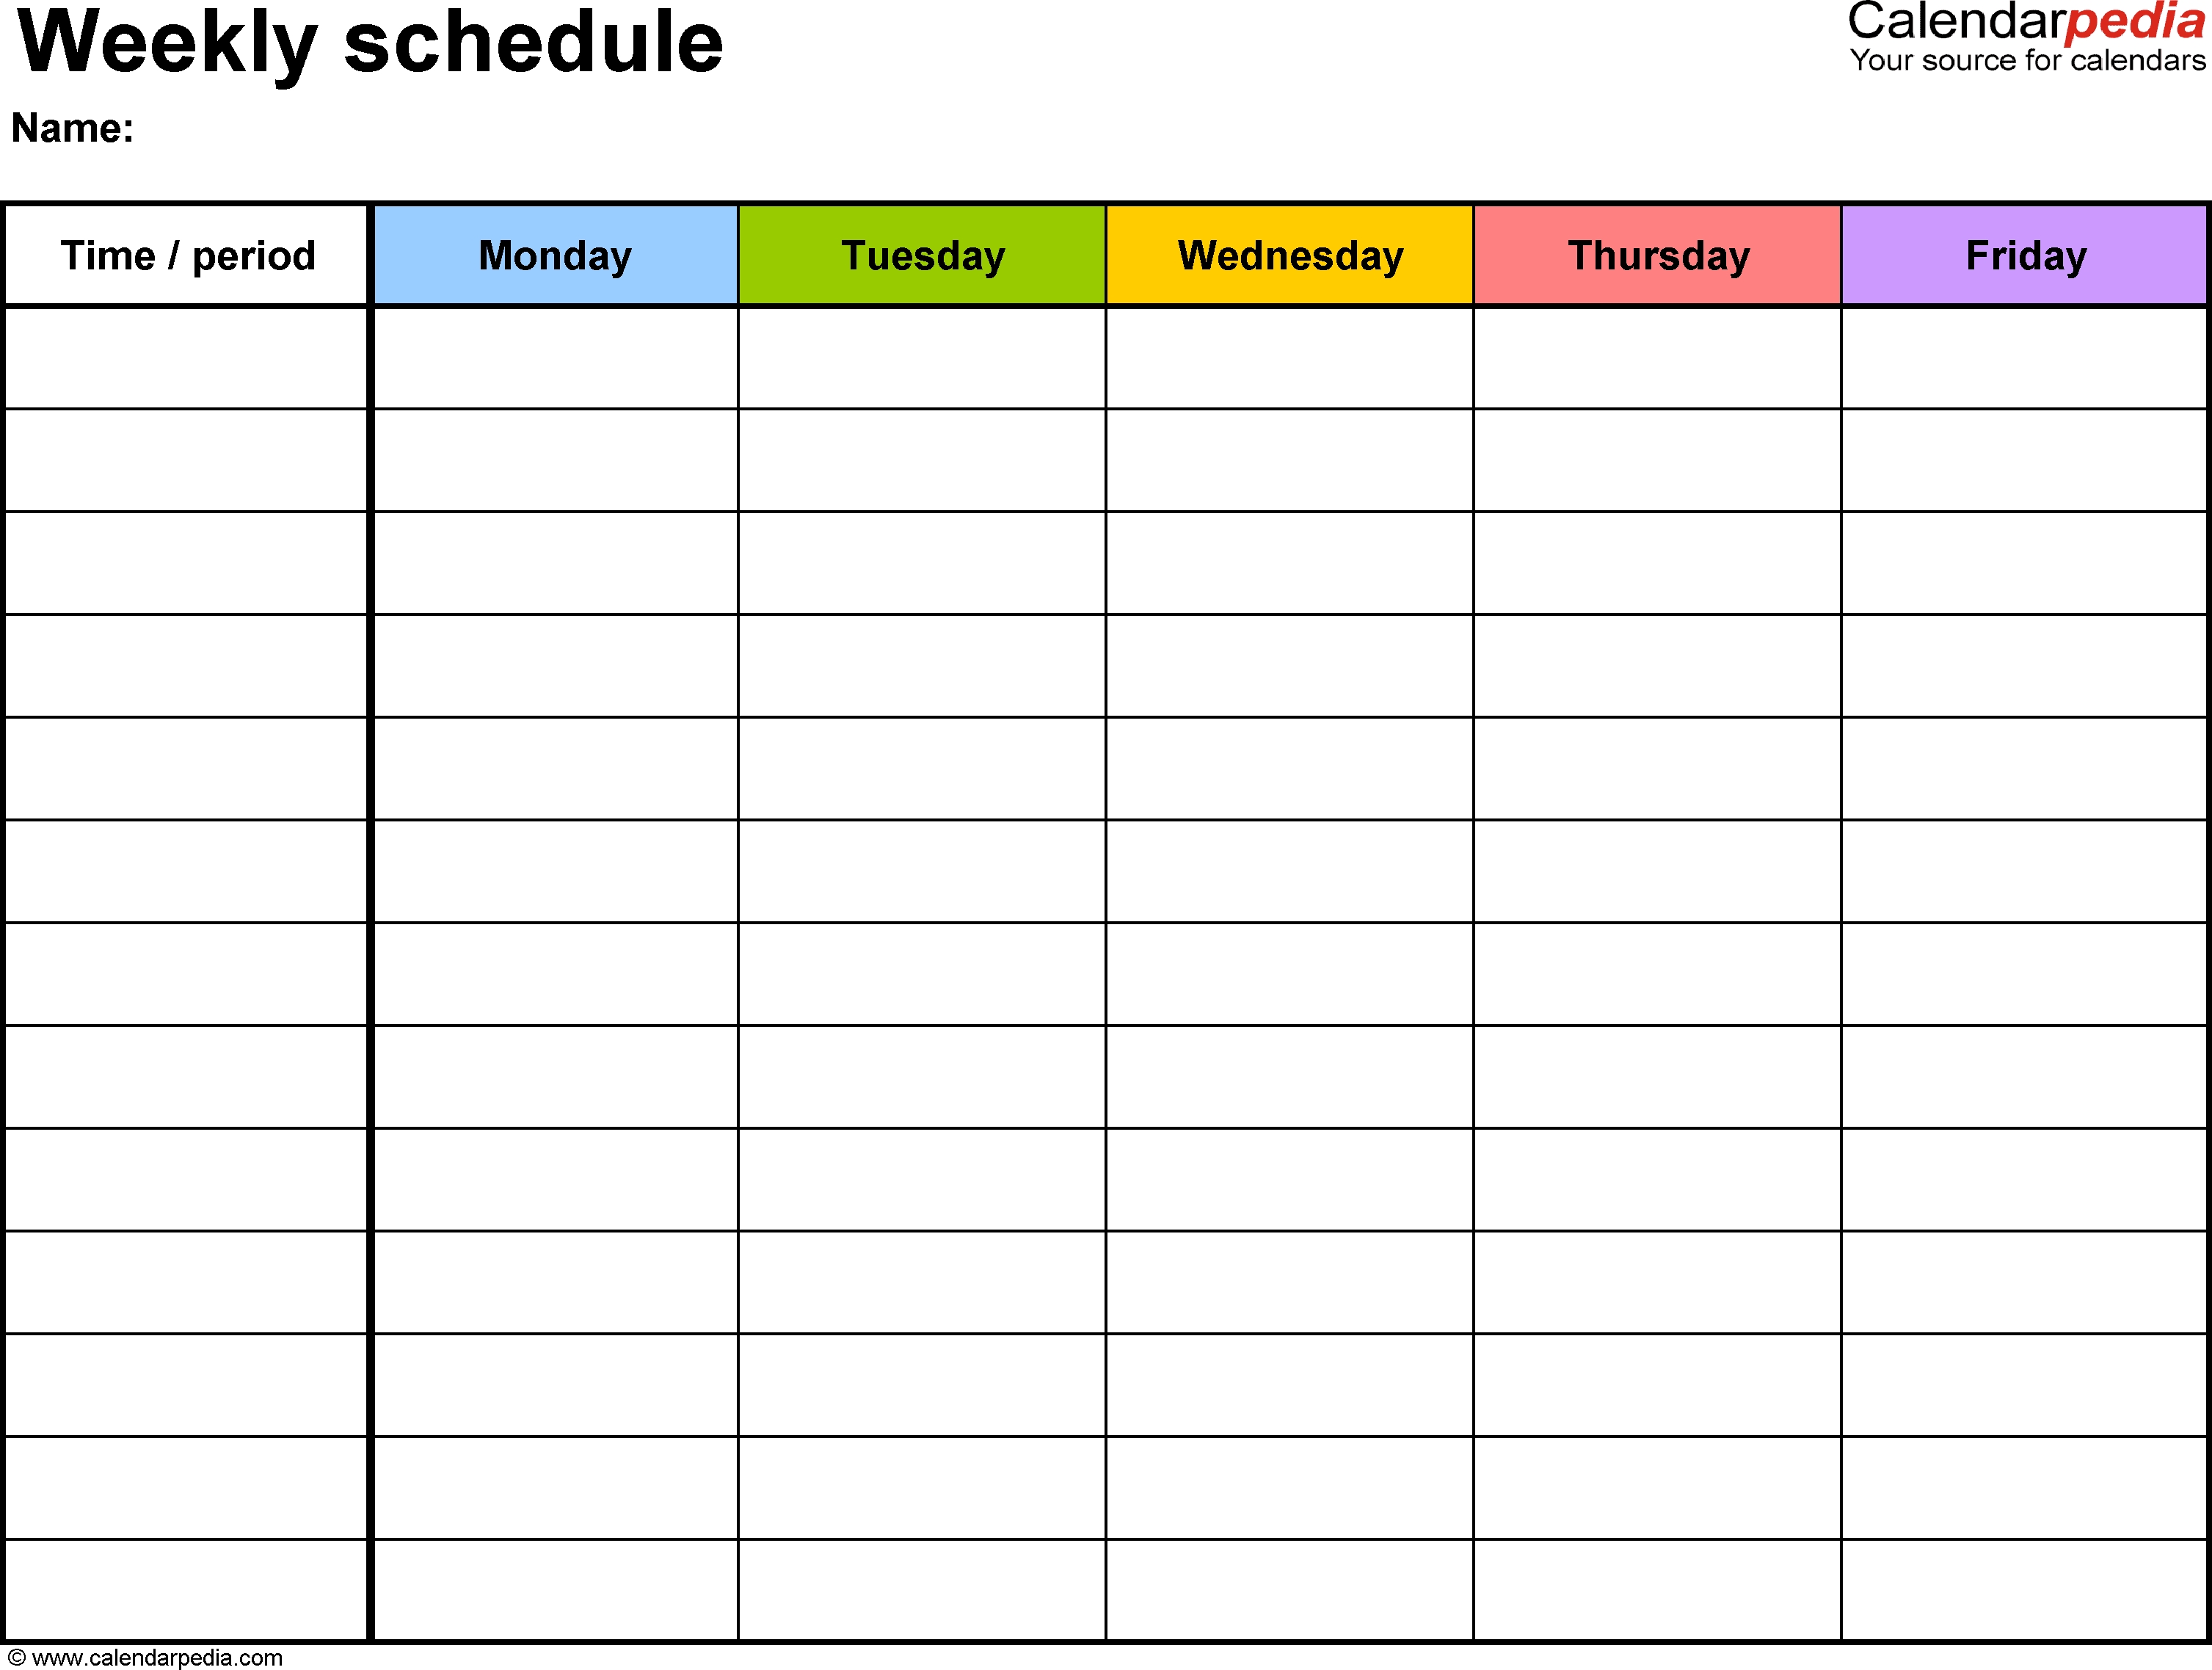 Free Weekly Schedule Templates For Word - 18 Templates  Blank Calendar To Fill In Free